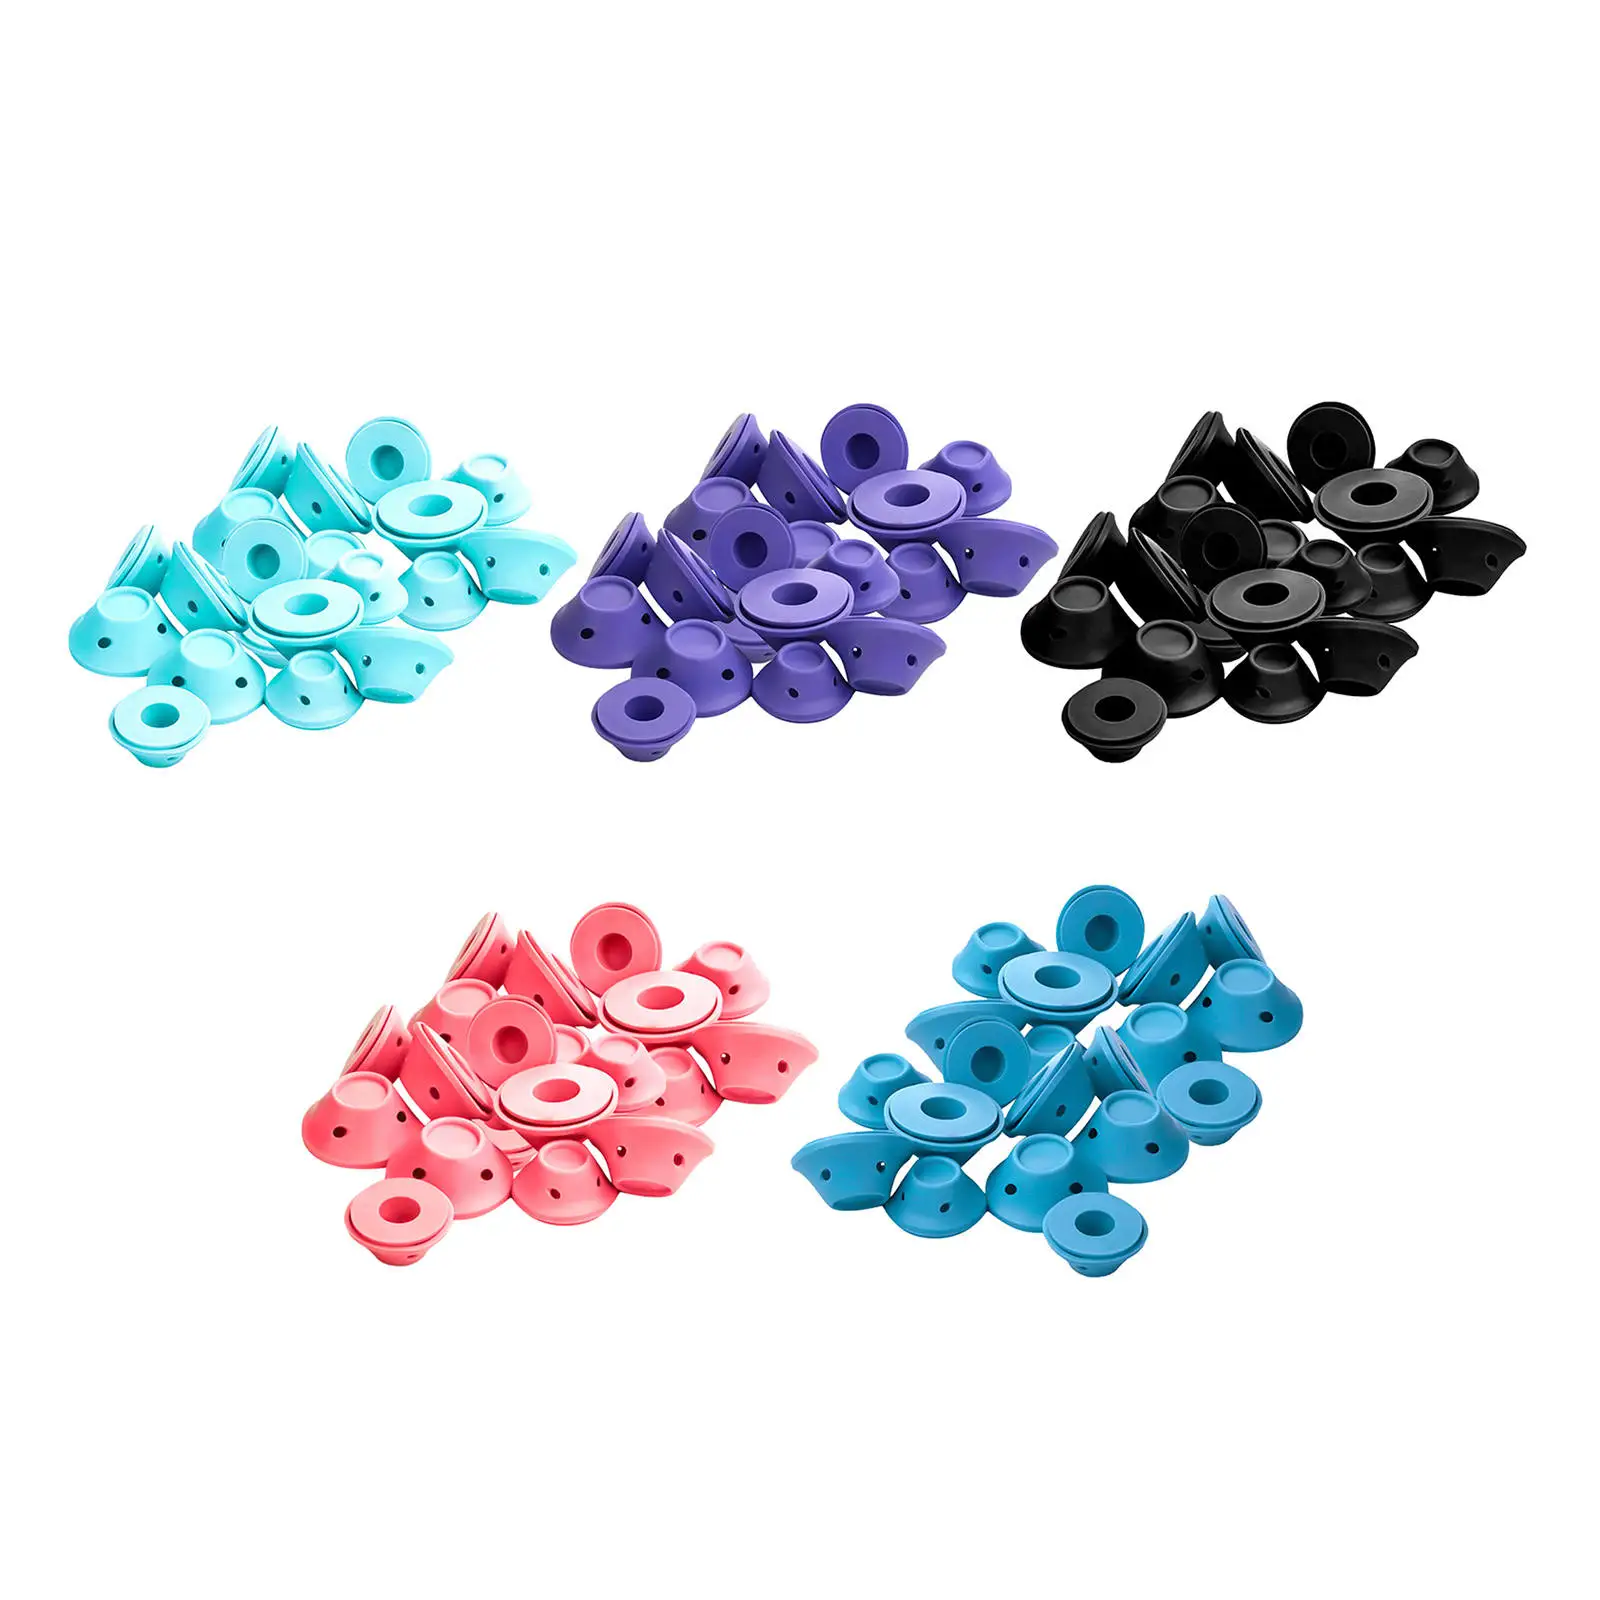 Silicone Hair Rollers Heatless Set Cold Wave Rollers Perm Rods for Natural Curly Wavy Hair Hairdressing Styling Kids Girls